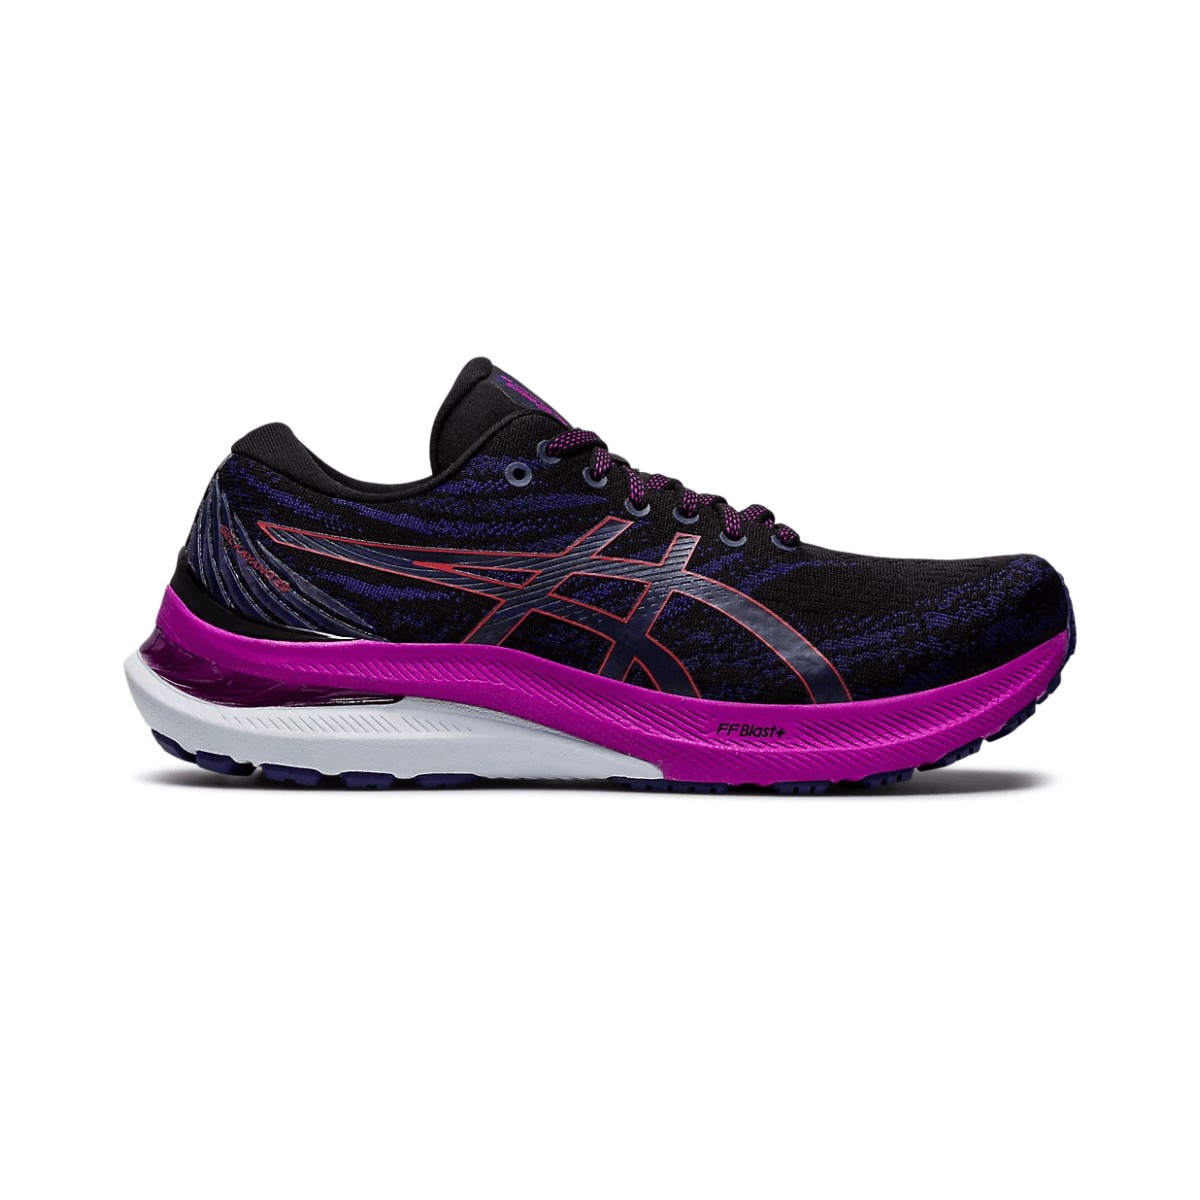 Chaussures Asics Gel Kayano 29 Noir Violet AW22 Mujer, Taille 37,5 - EUR